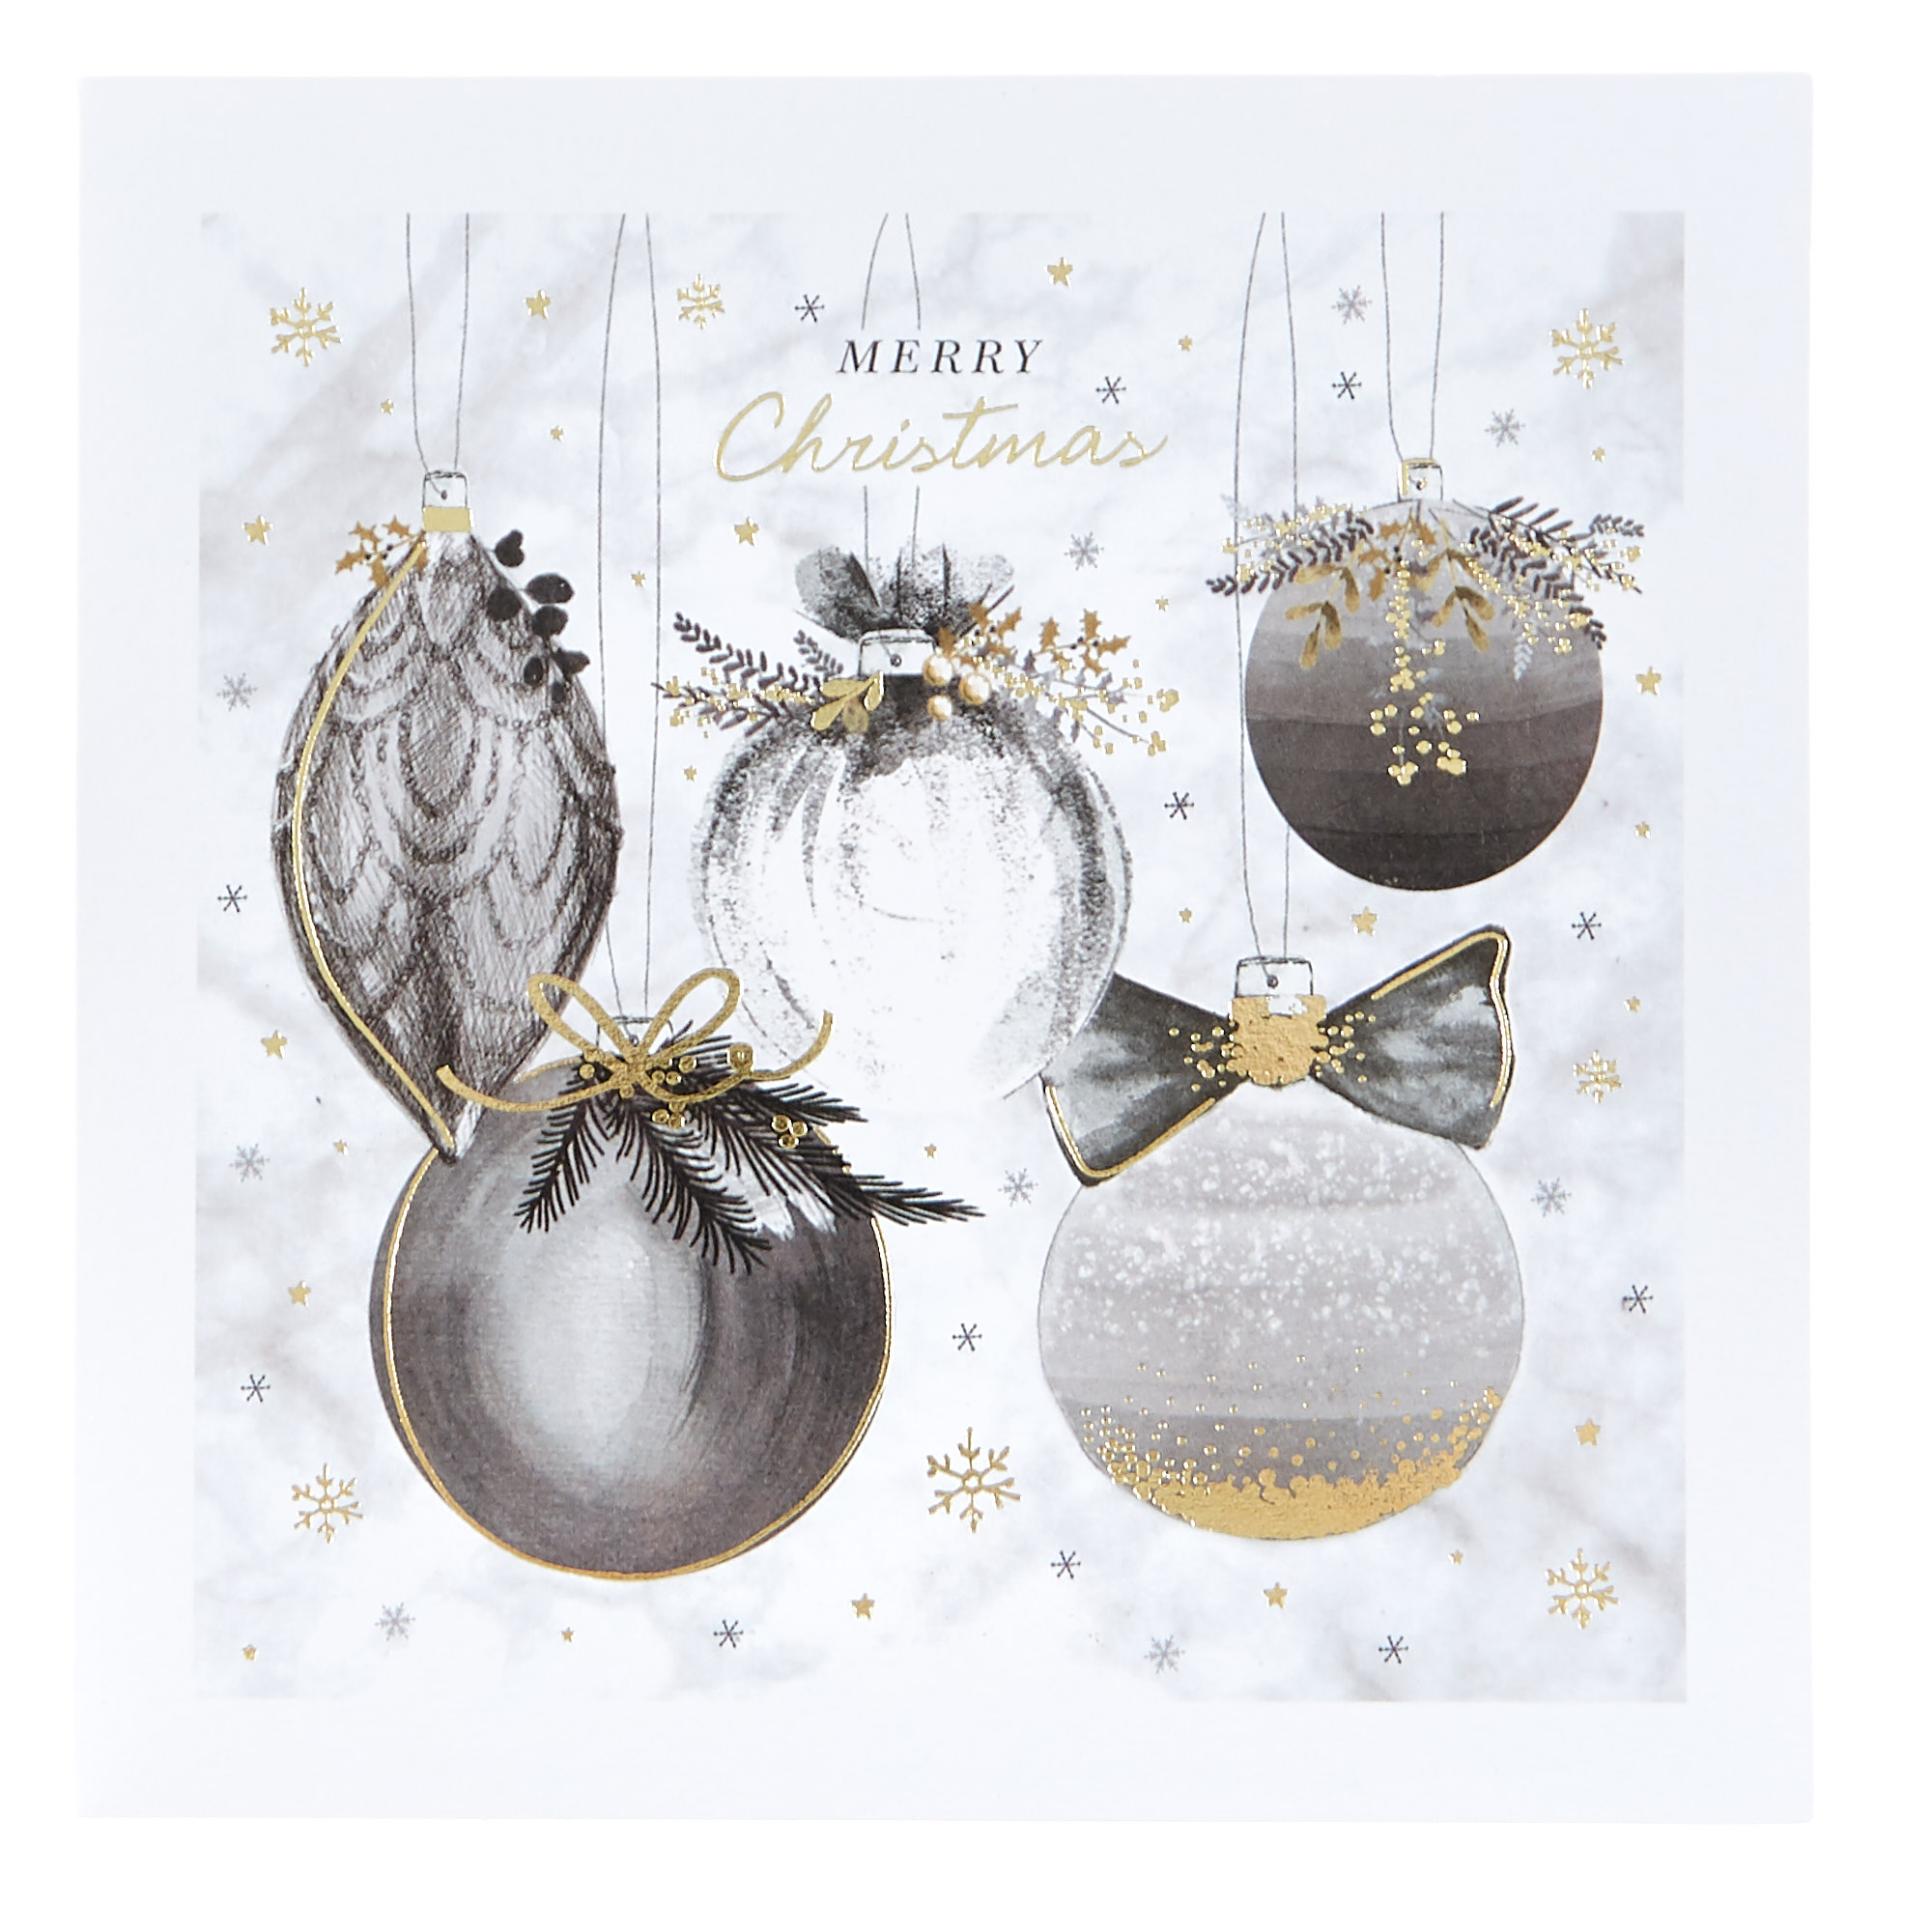 20 Charity Christmas Cards - Black & Gold (4 Designs)